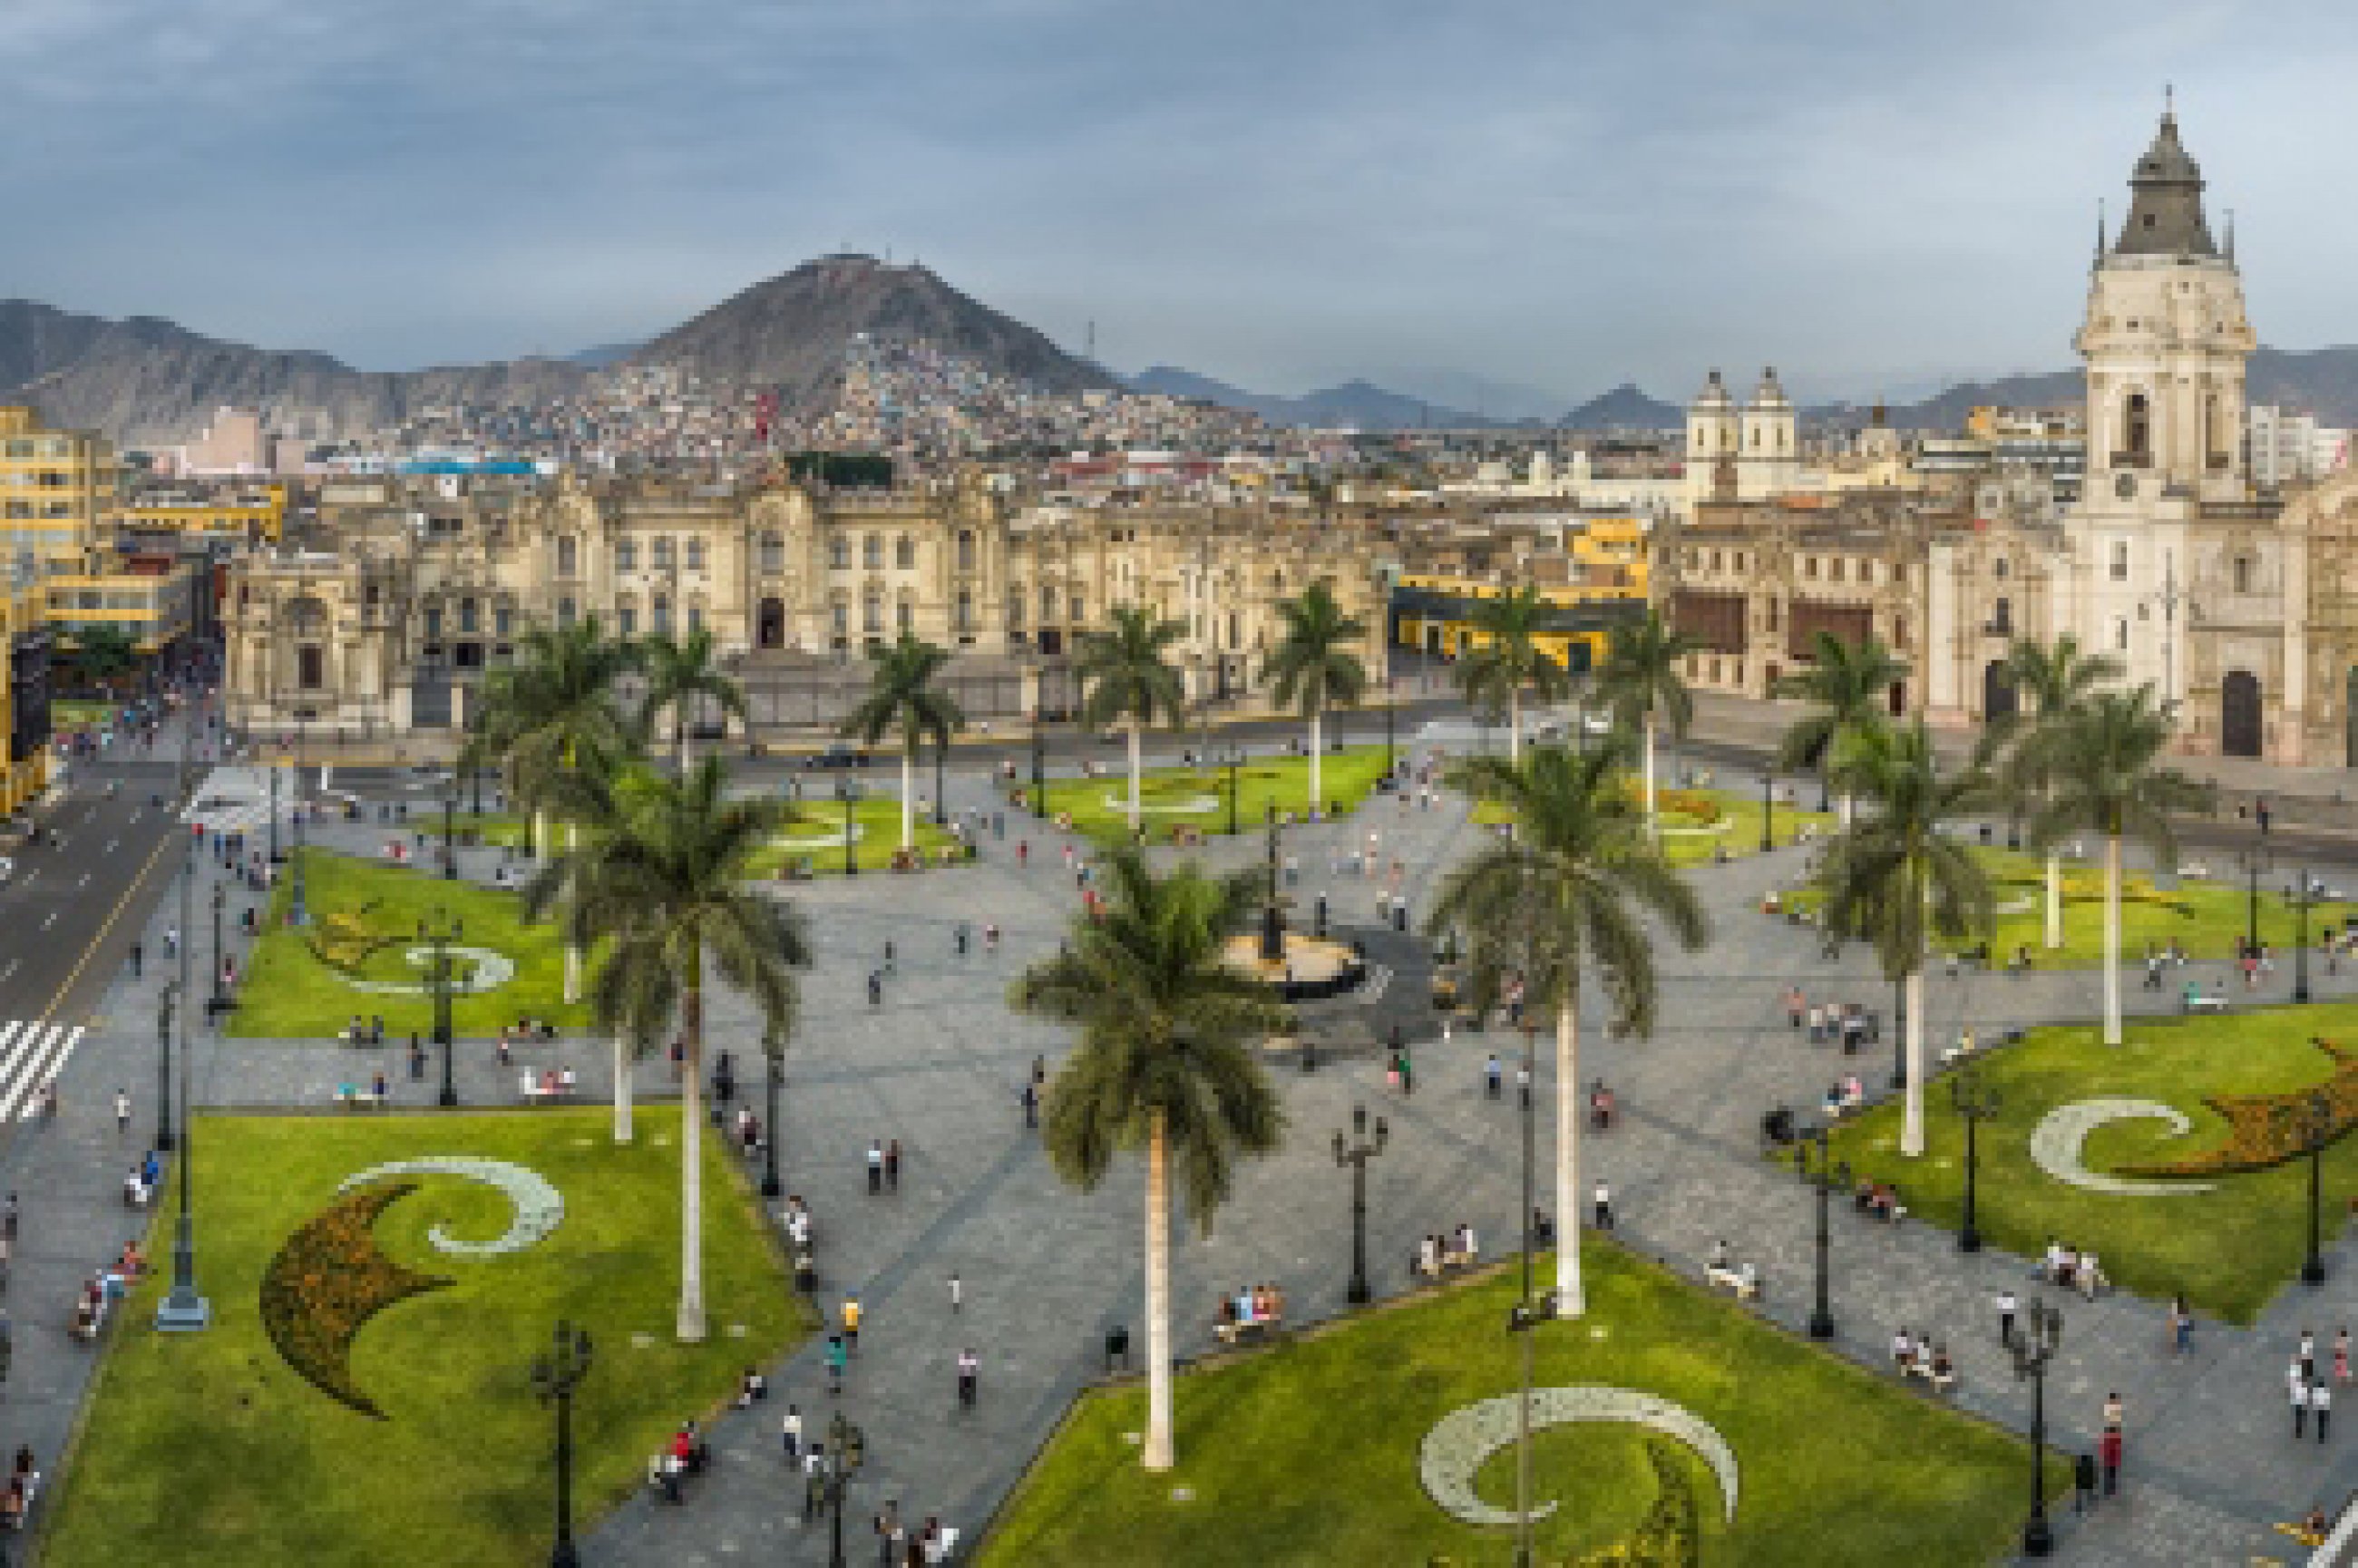 https://bubo.sk/uploads/galleries/7430/panoramic-view-of-the-main-square-of-lima-peru..jpg